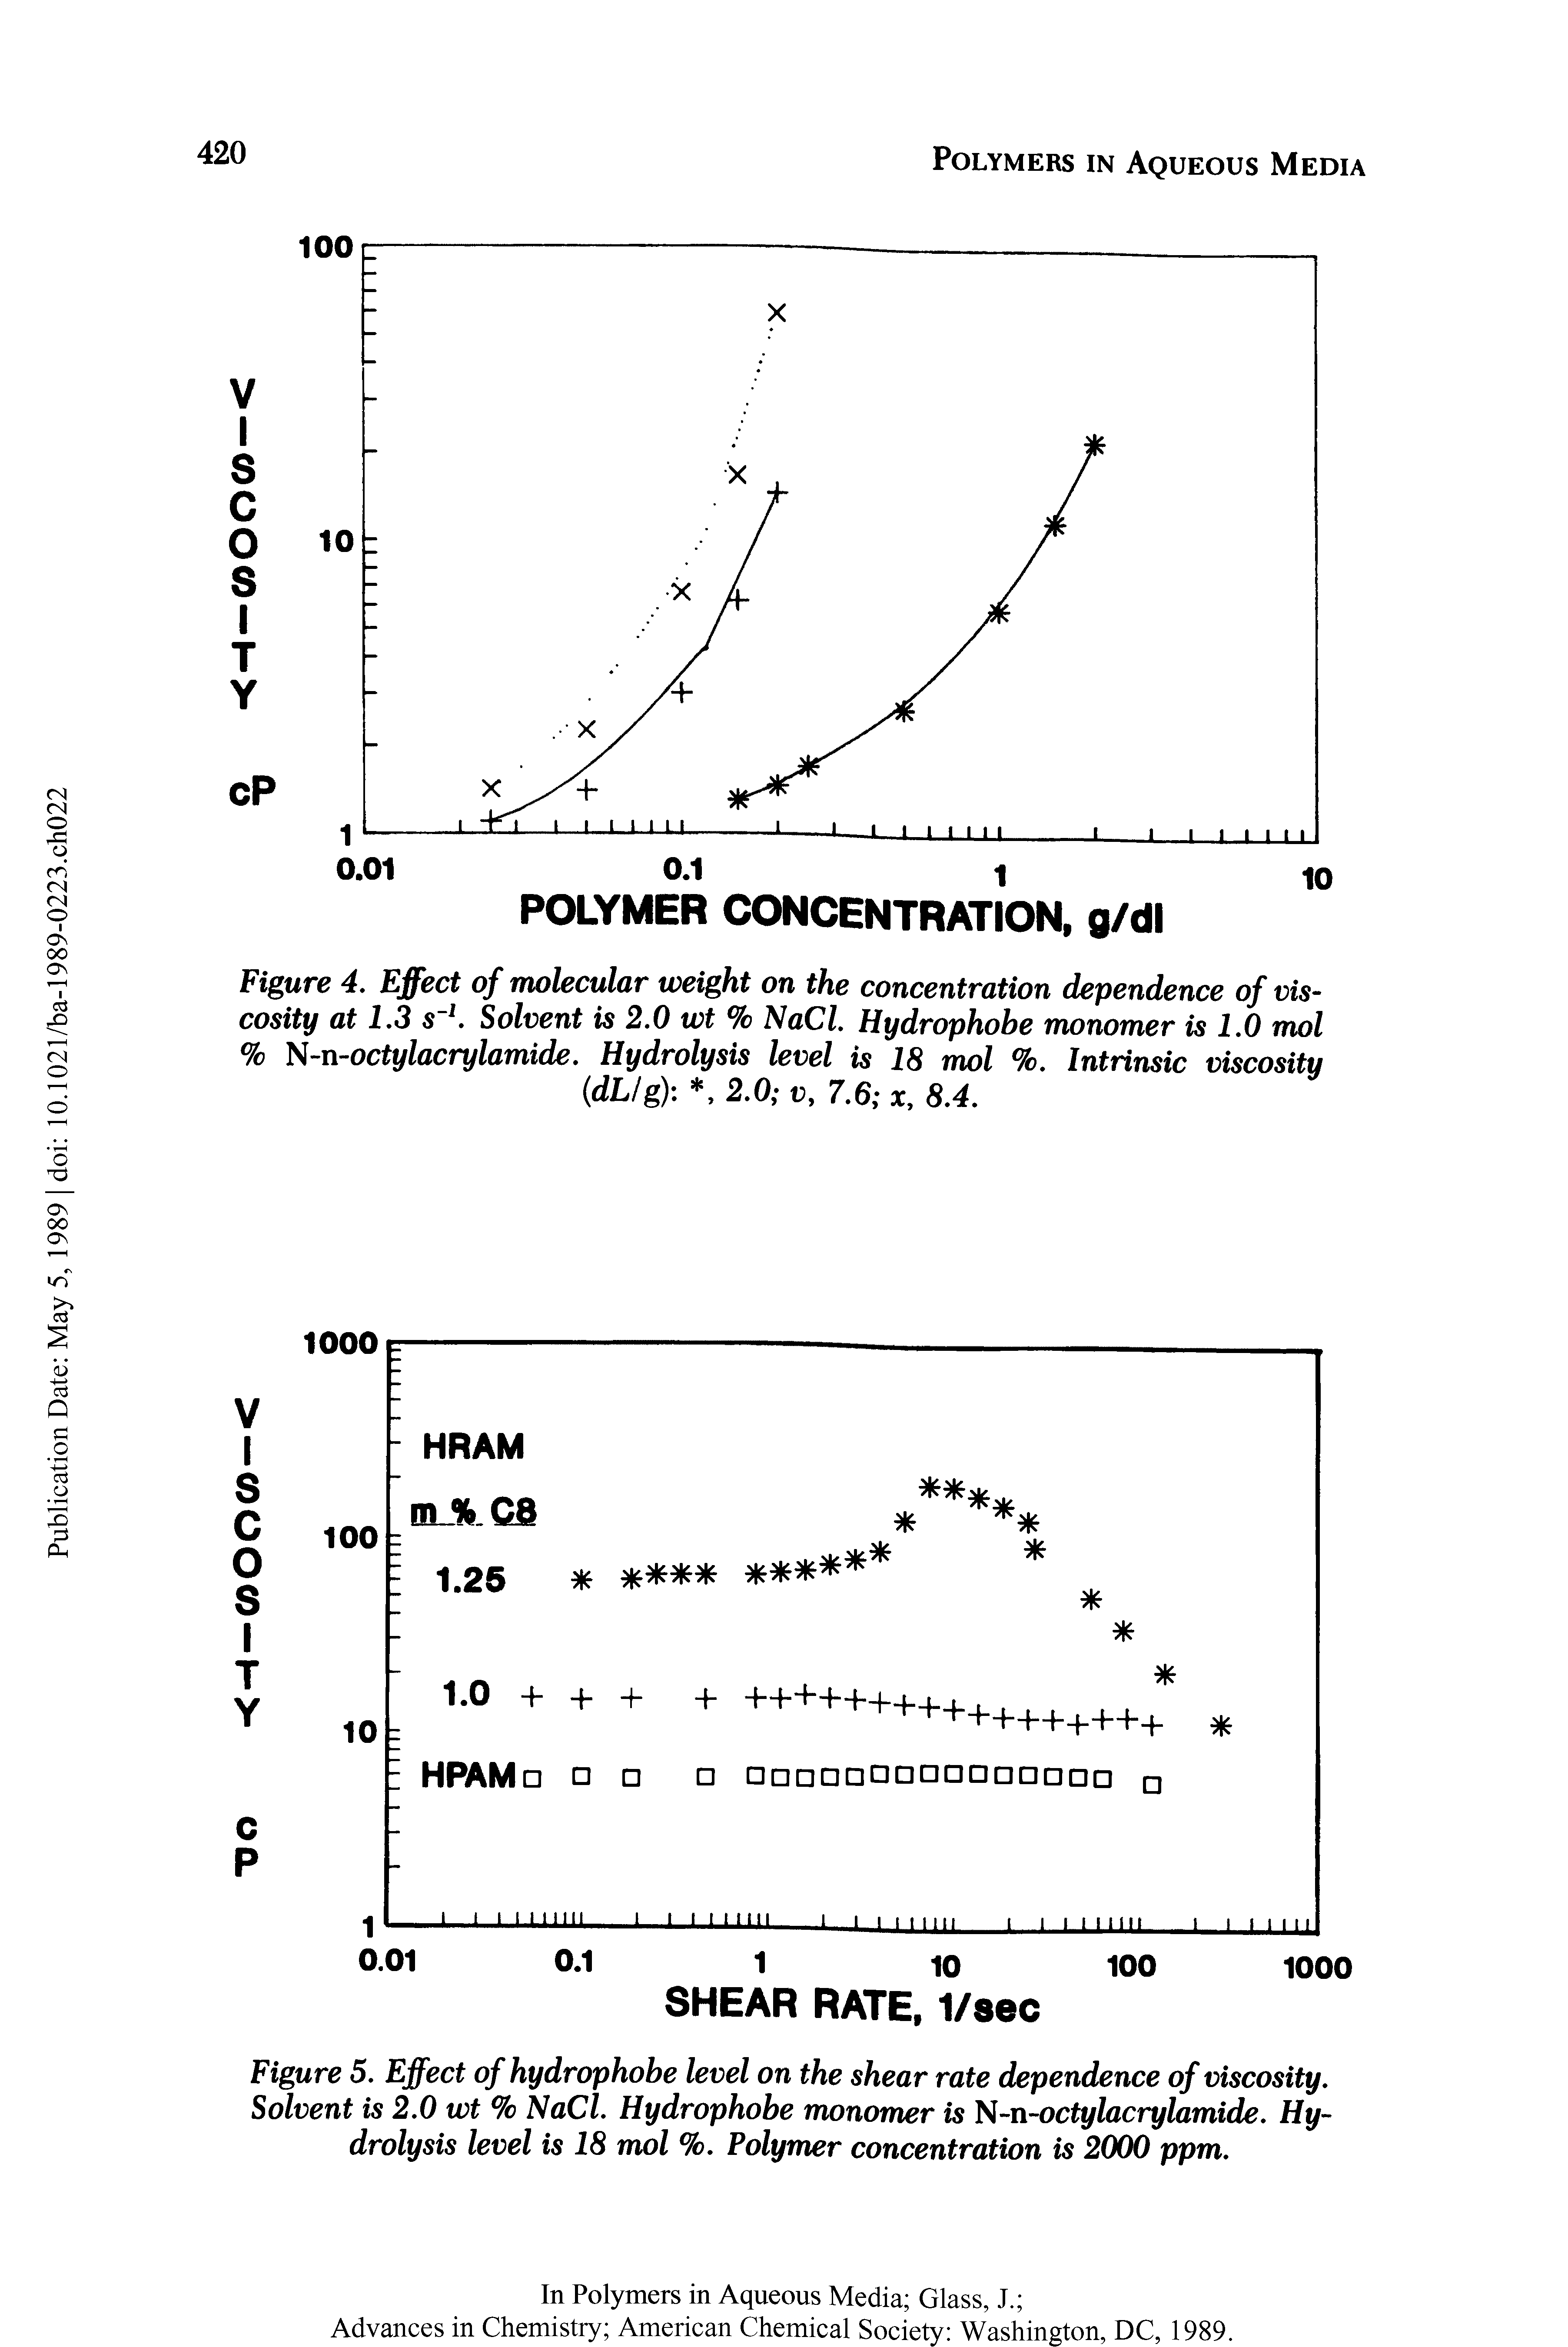 Figure 5. Effect of hydrophobe level on the shear rate dependence of viscosity. Solvent is 2.0 wt % NaCl. Hydrophobe monomer is N-n-octylacrylamide. Hydrolysis level is 18 mol %. Polymer concentration is 2000 ppm.